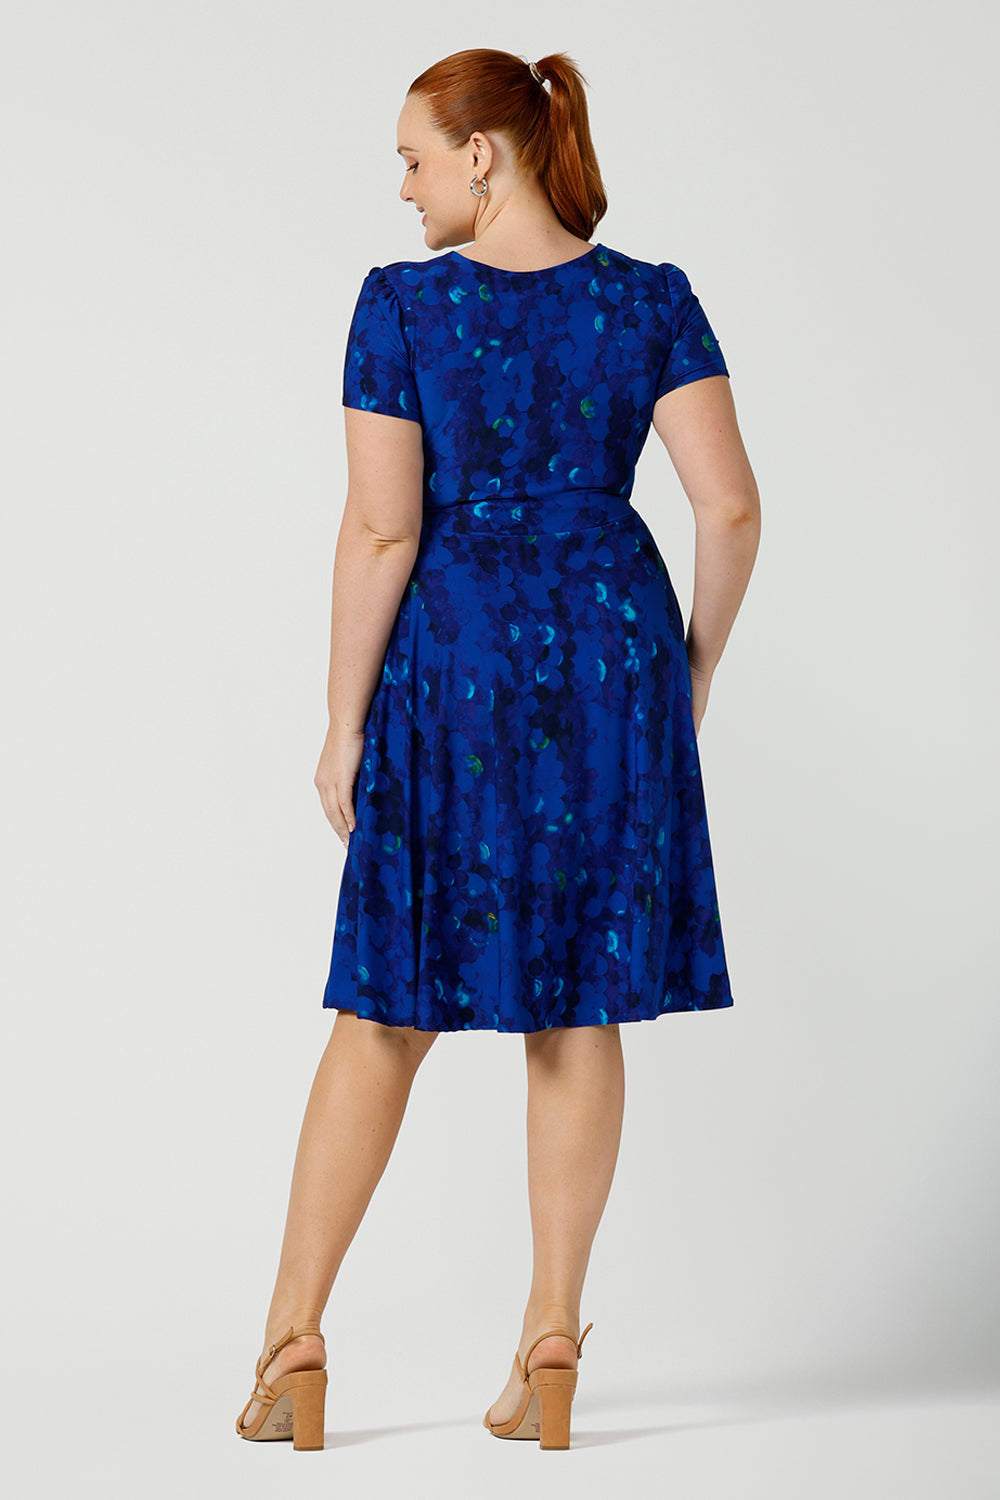 Back view of a size 12 fuller figure woman, wearing a chic dress for plus size and fuller figure women, this V-neck dress with 3/4 sleeves comes in a cobalt abstract spotted print and has a knee-length skirt, this dress is good for casual weekend wear.